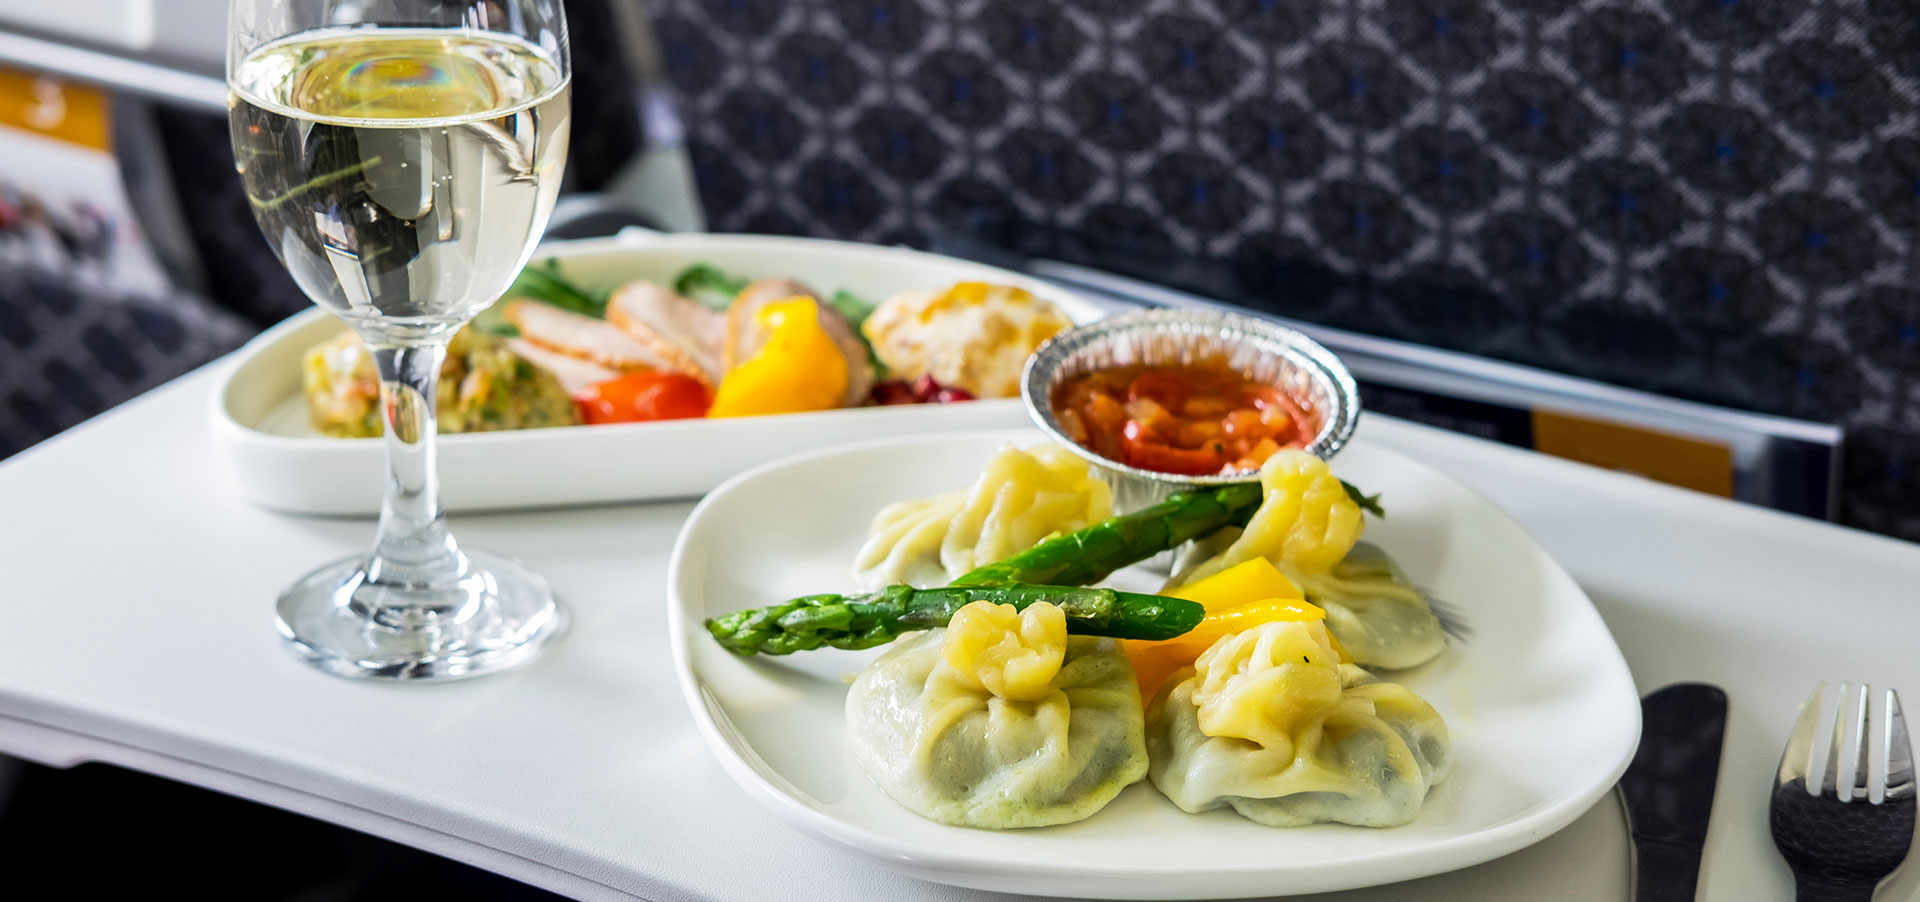 Airplane tray holds an exquisite meal of ravioli with asparagus, chicken with squash and a rice pilaf, with a stemmed glass goblet of water and silverware